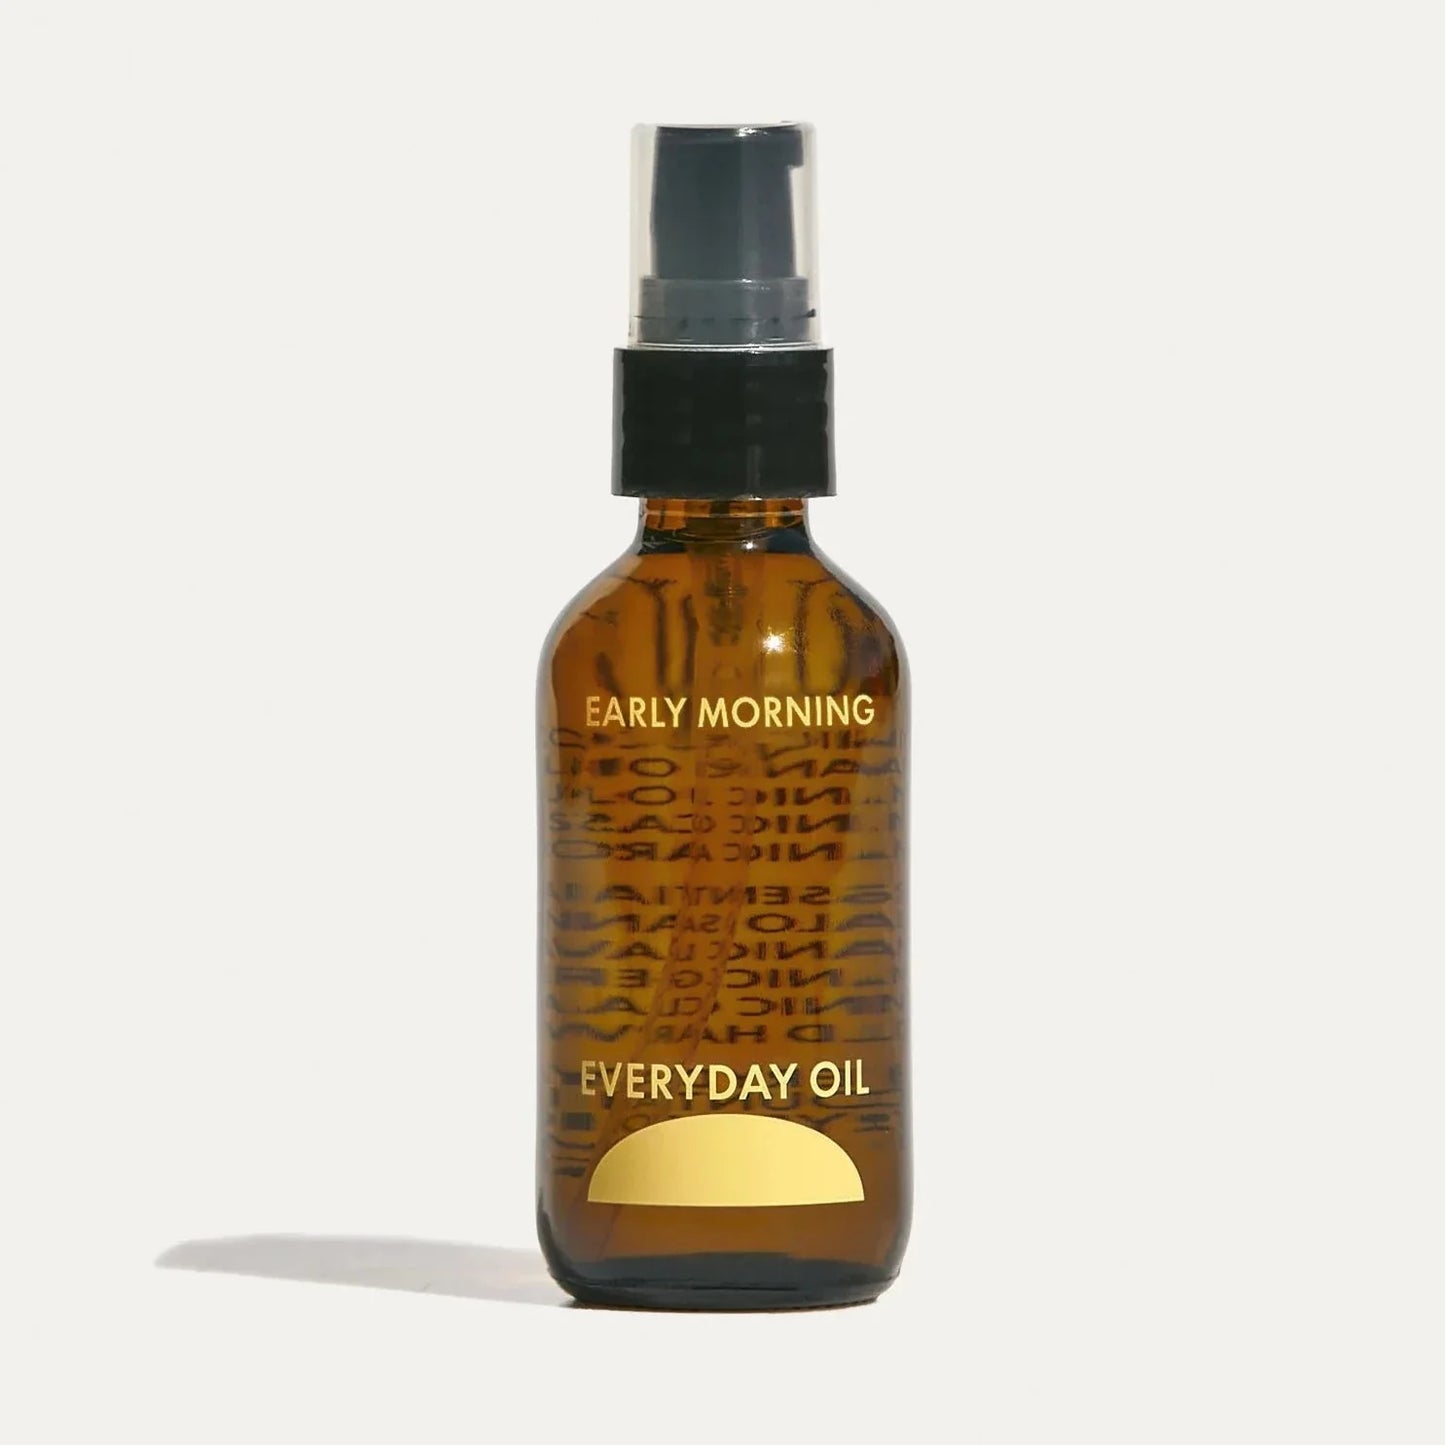 Everyday oil Early Morning available at Easy Tiger Toronto